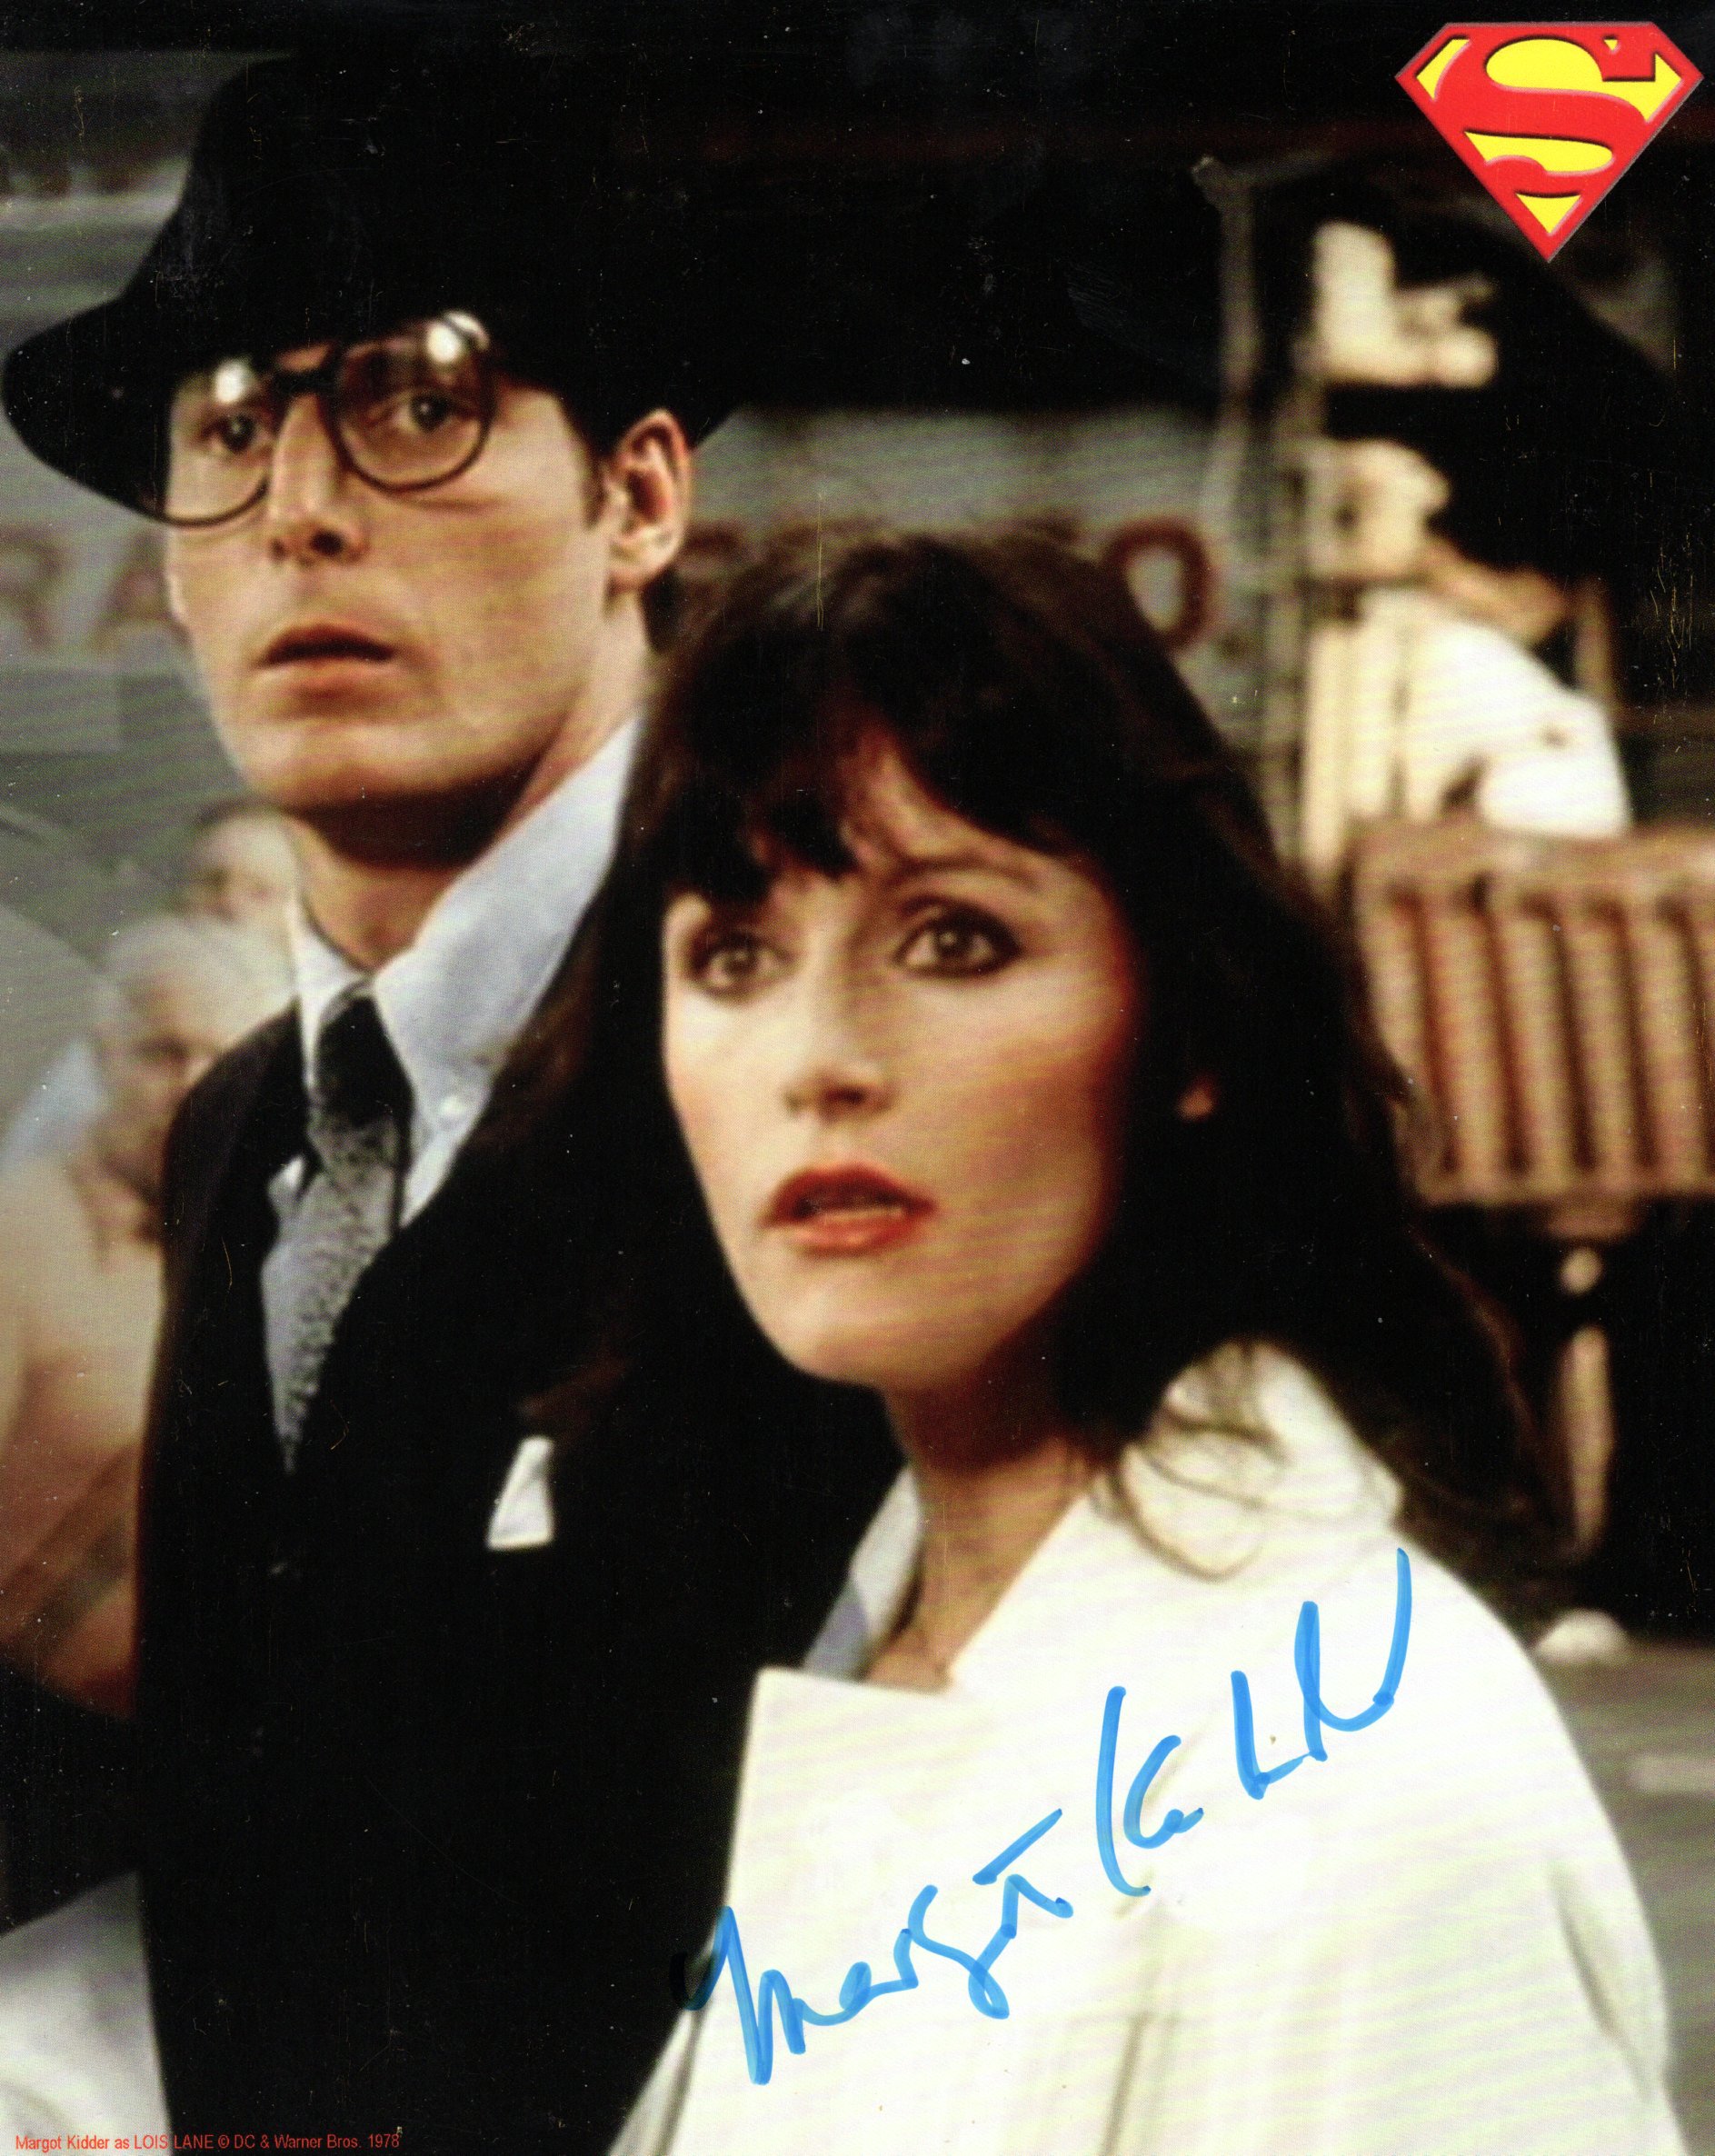 Superman movie photo signed by the late Margot Kidder who played Lois Lane. Good condition. All